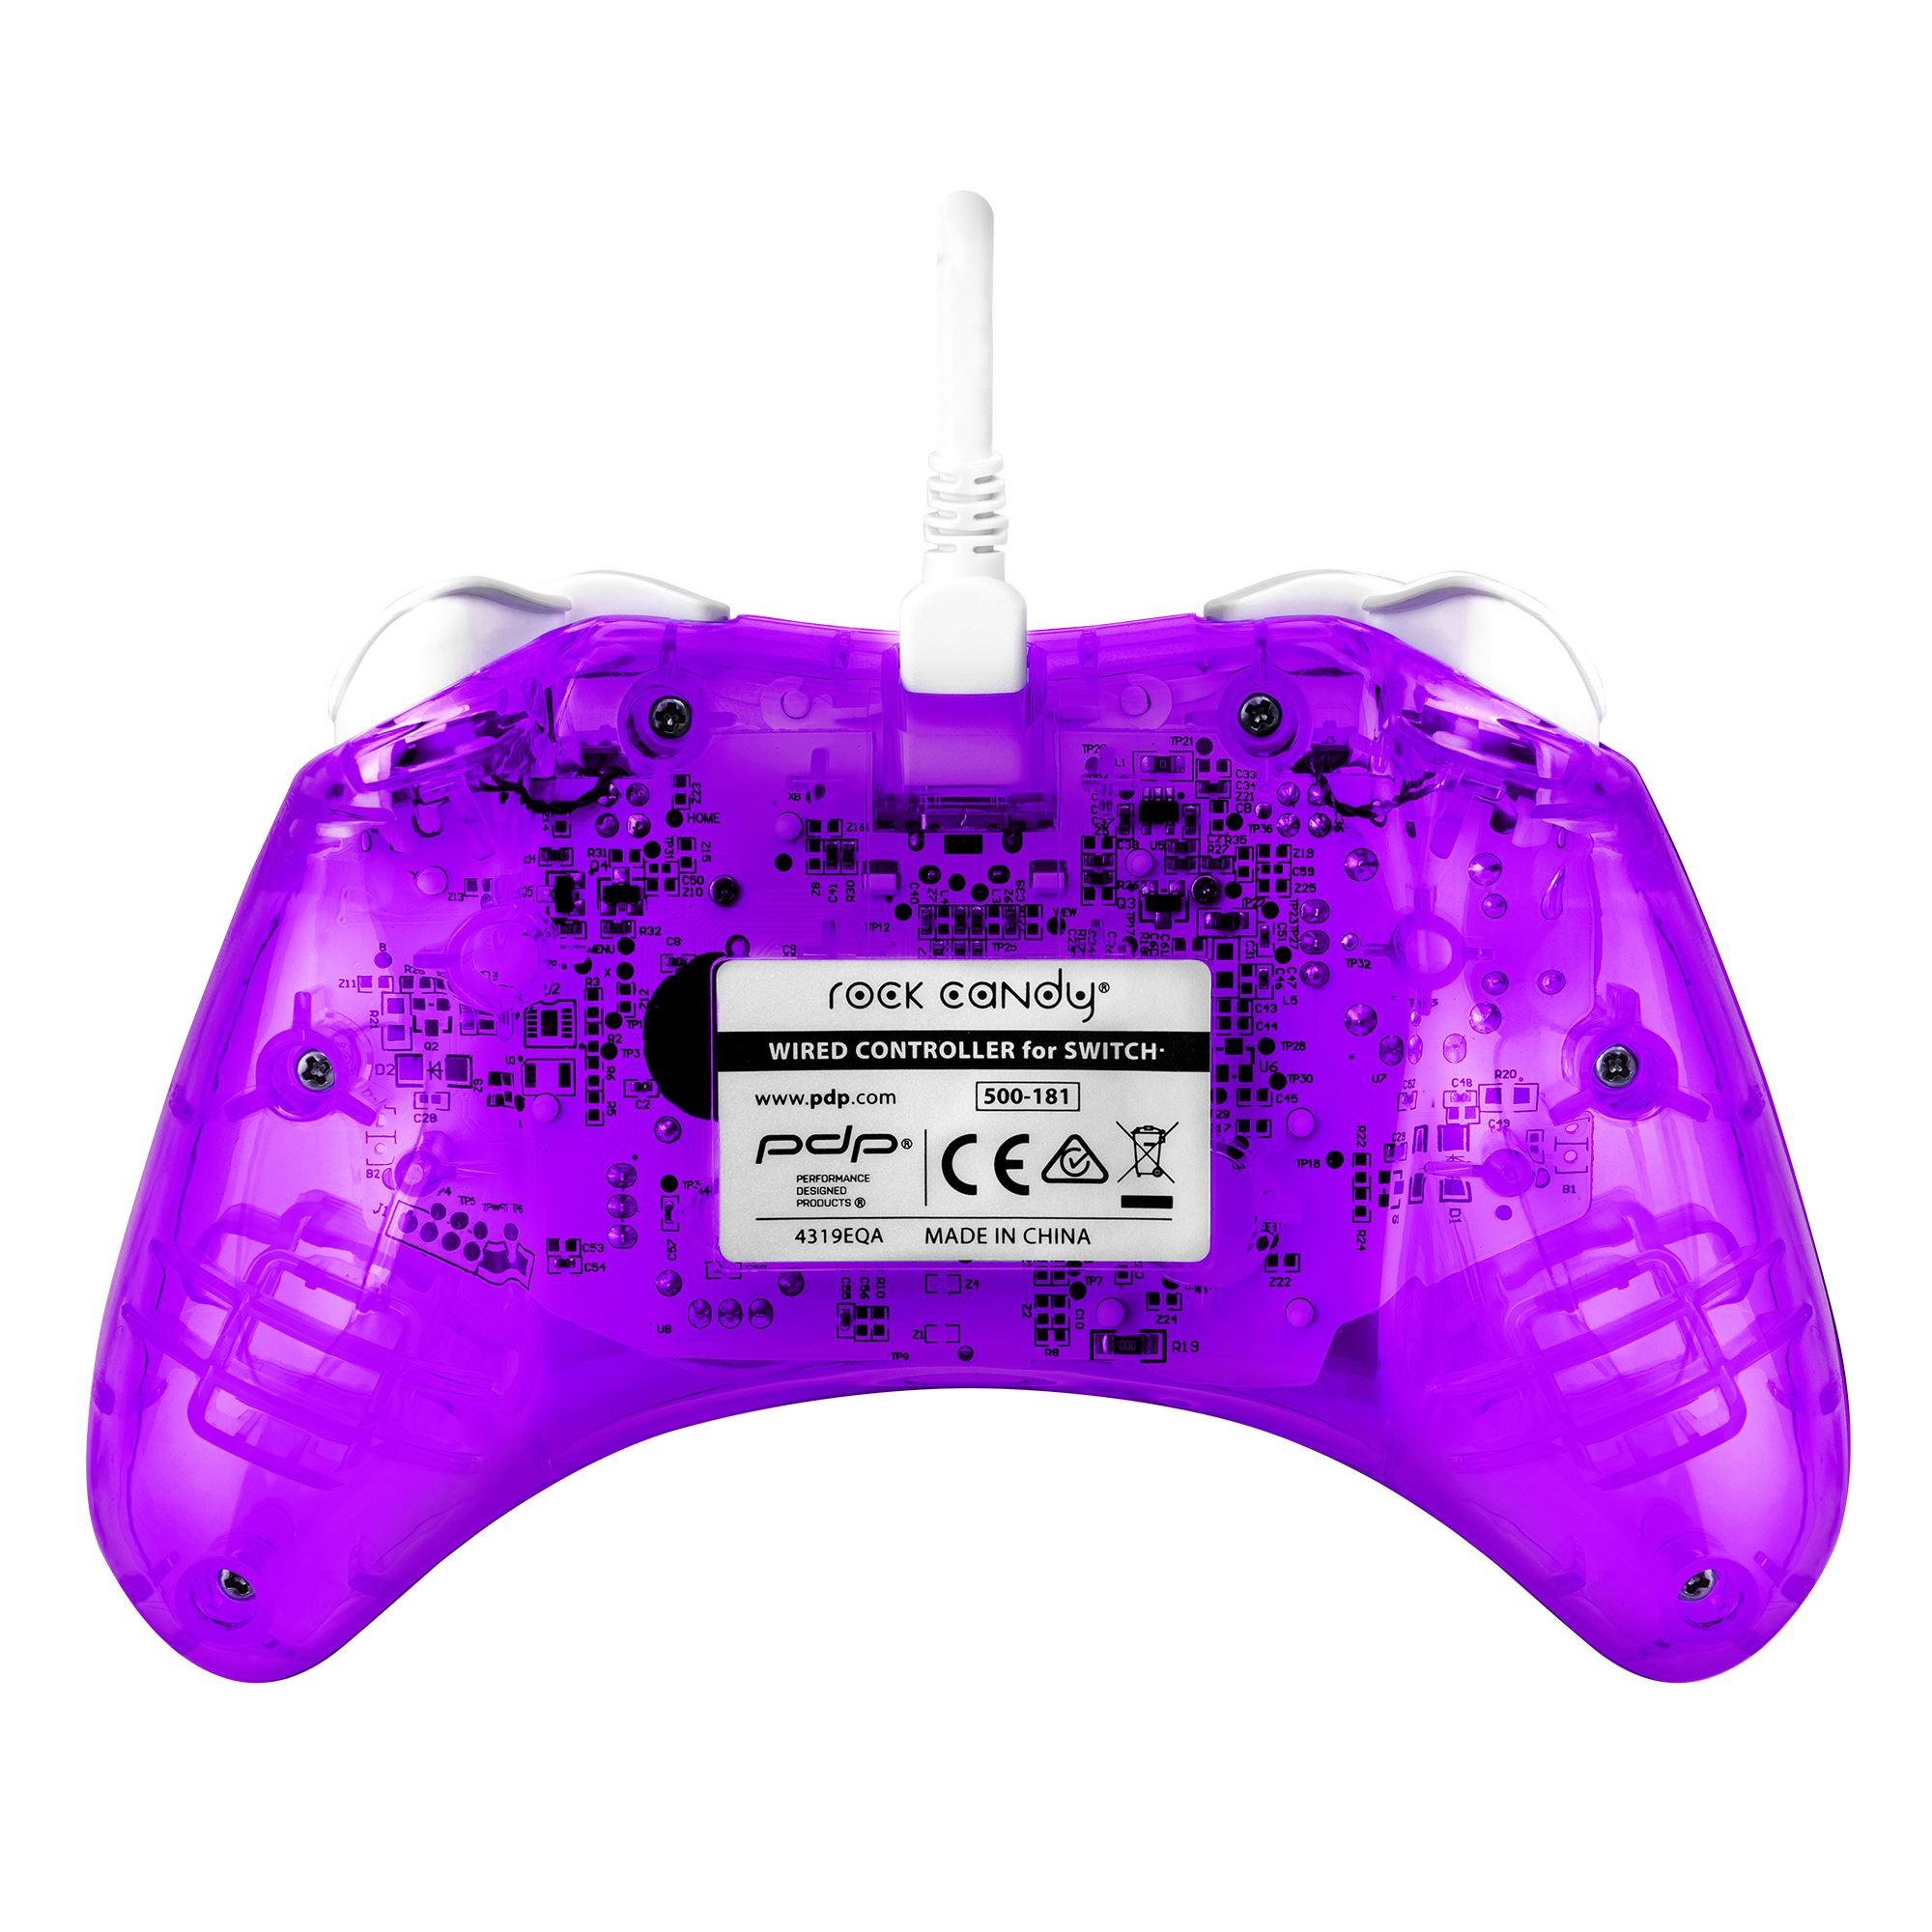 PDP Rock Candy Wired Controller for Nintendo Switch - Cosmo Berry